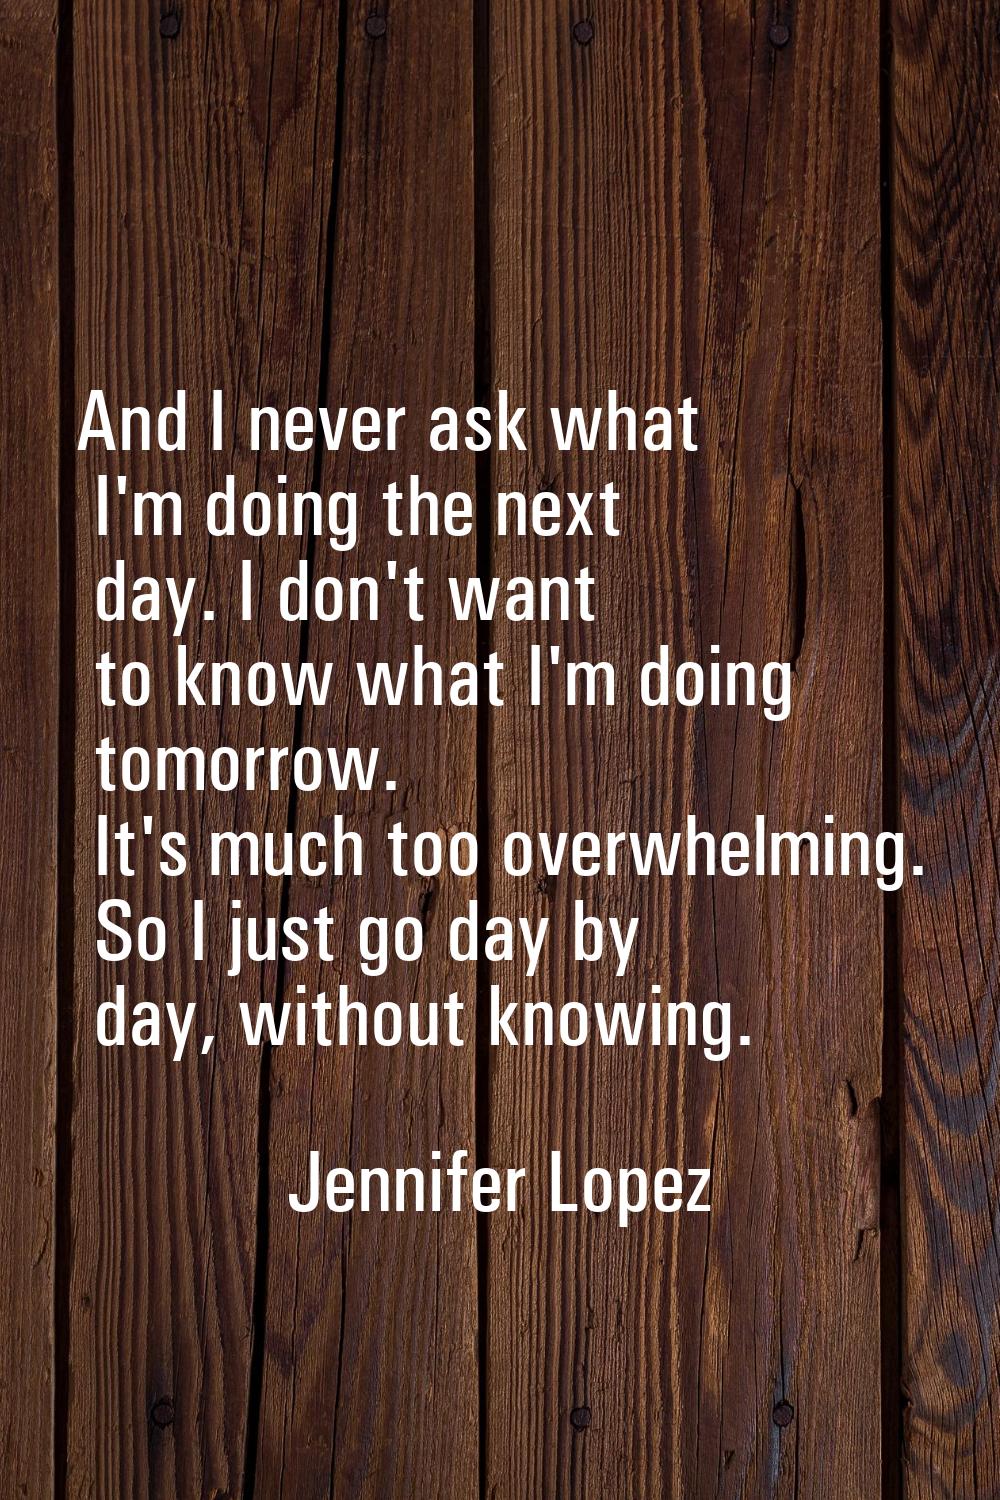 And I never ask what I'm doing the next day. I don't want to know what I'm doing tomorrow. It's muc